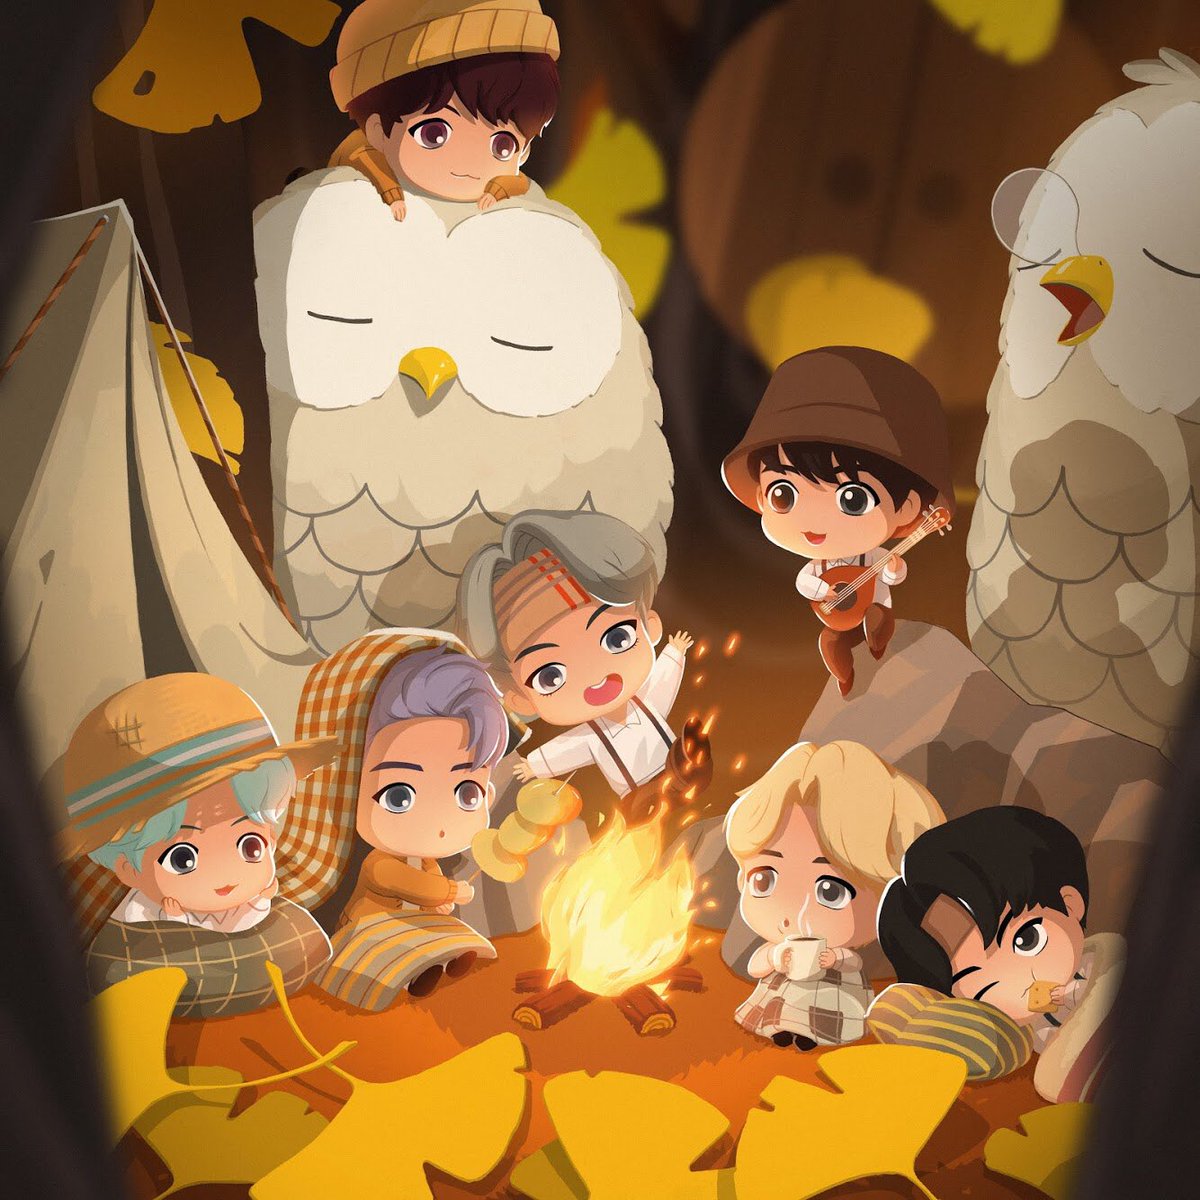 Gather around! It's time to soak up autumn's gifts!

#Campfire #Bulmeong #Autumn_leaves #Relief